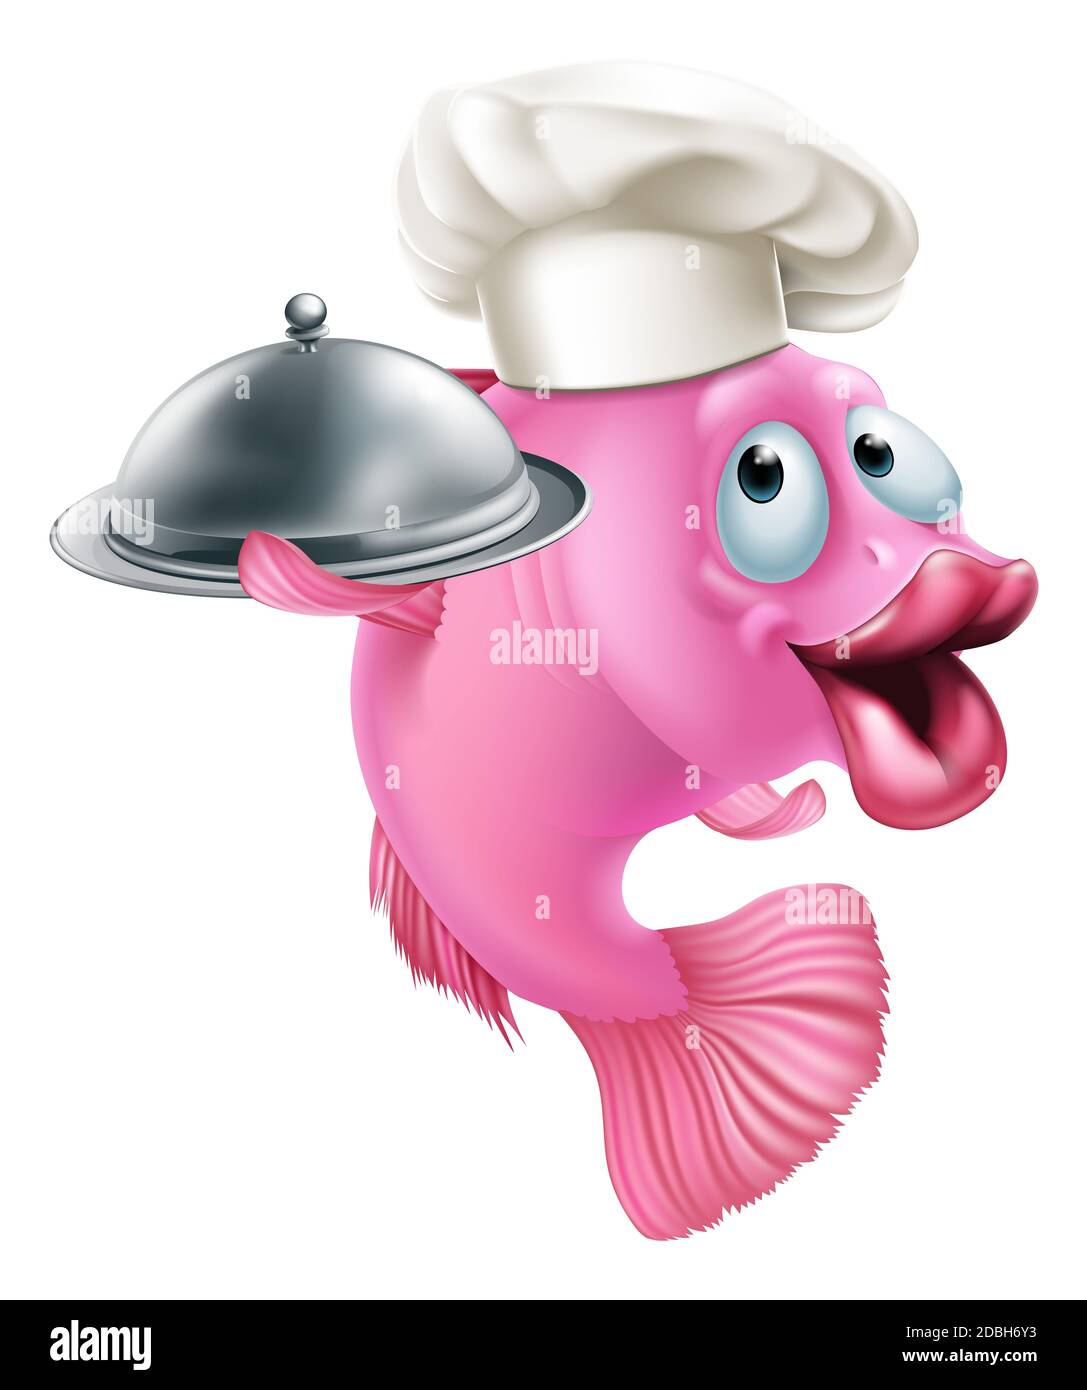 A cartoon chef fish mascot holding a tray or platter cloche, seafood character concept Stock Photo